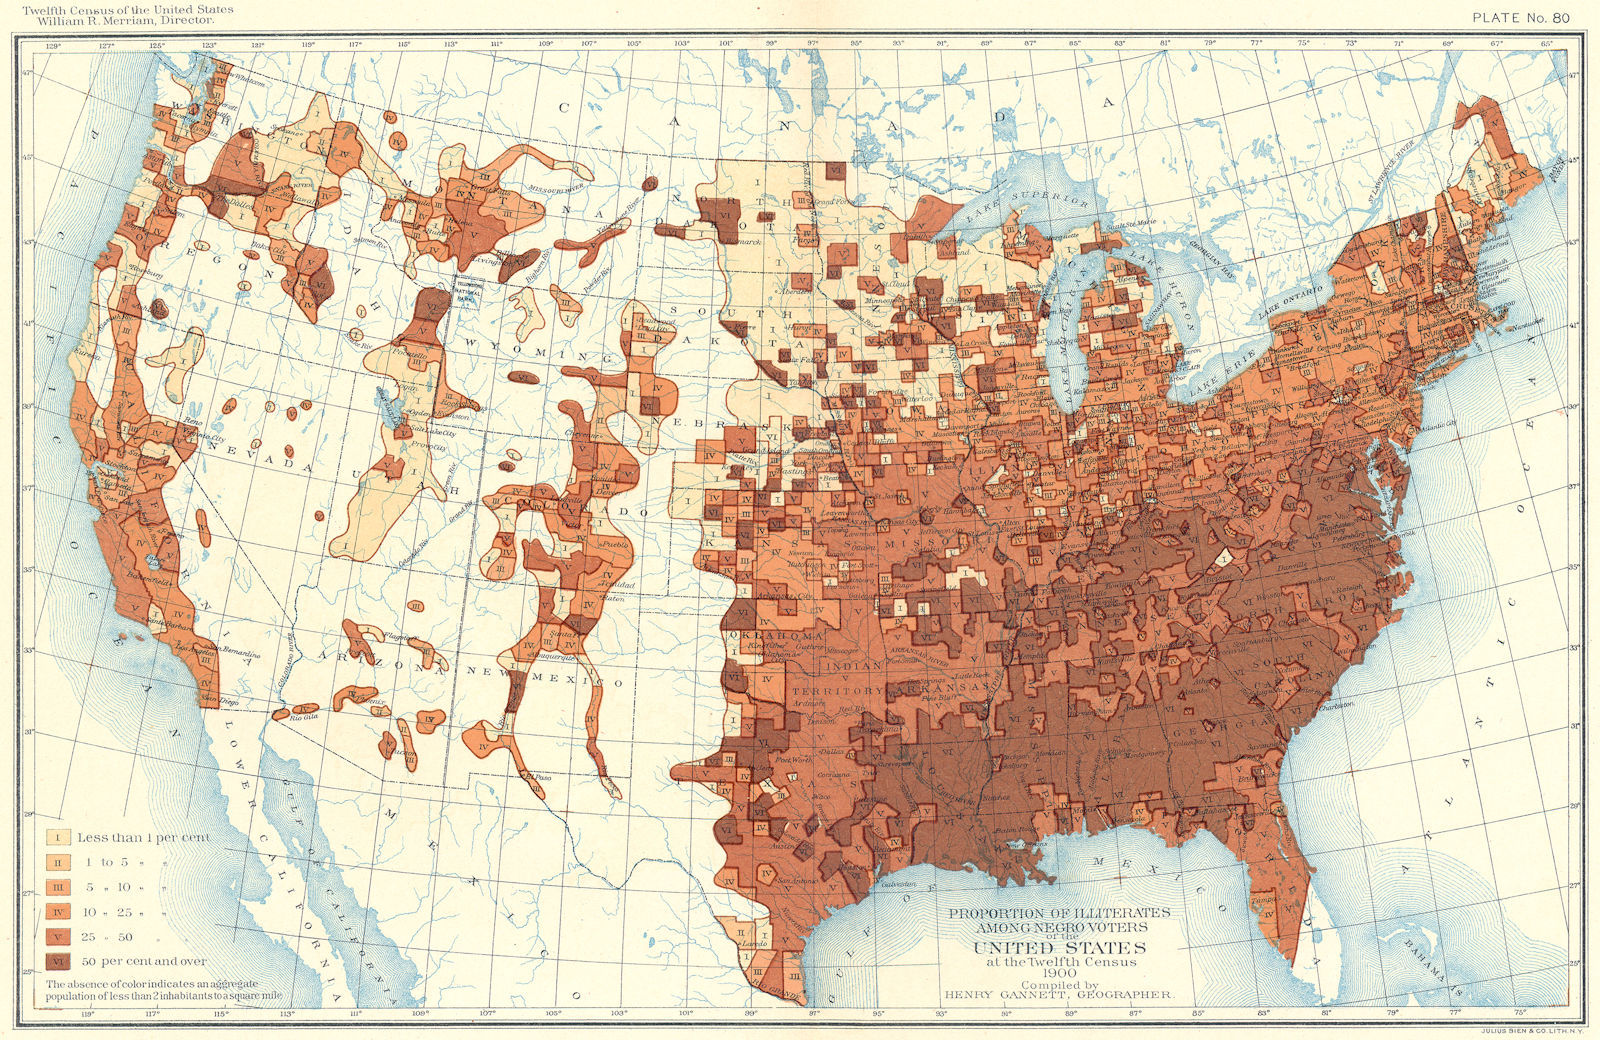 Associate Product USA. % Illiterates among negro voters US 12th census  1900 old antique map